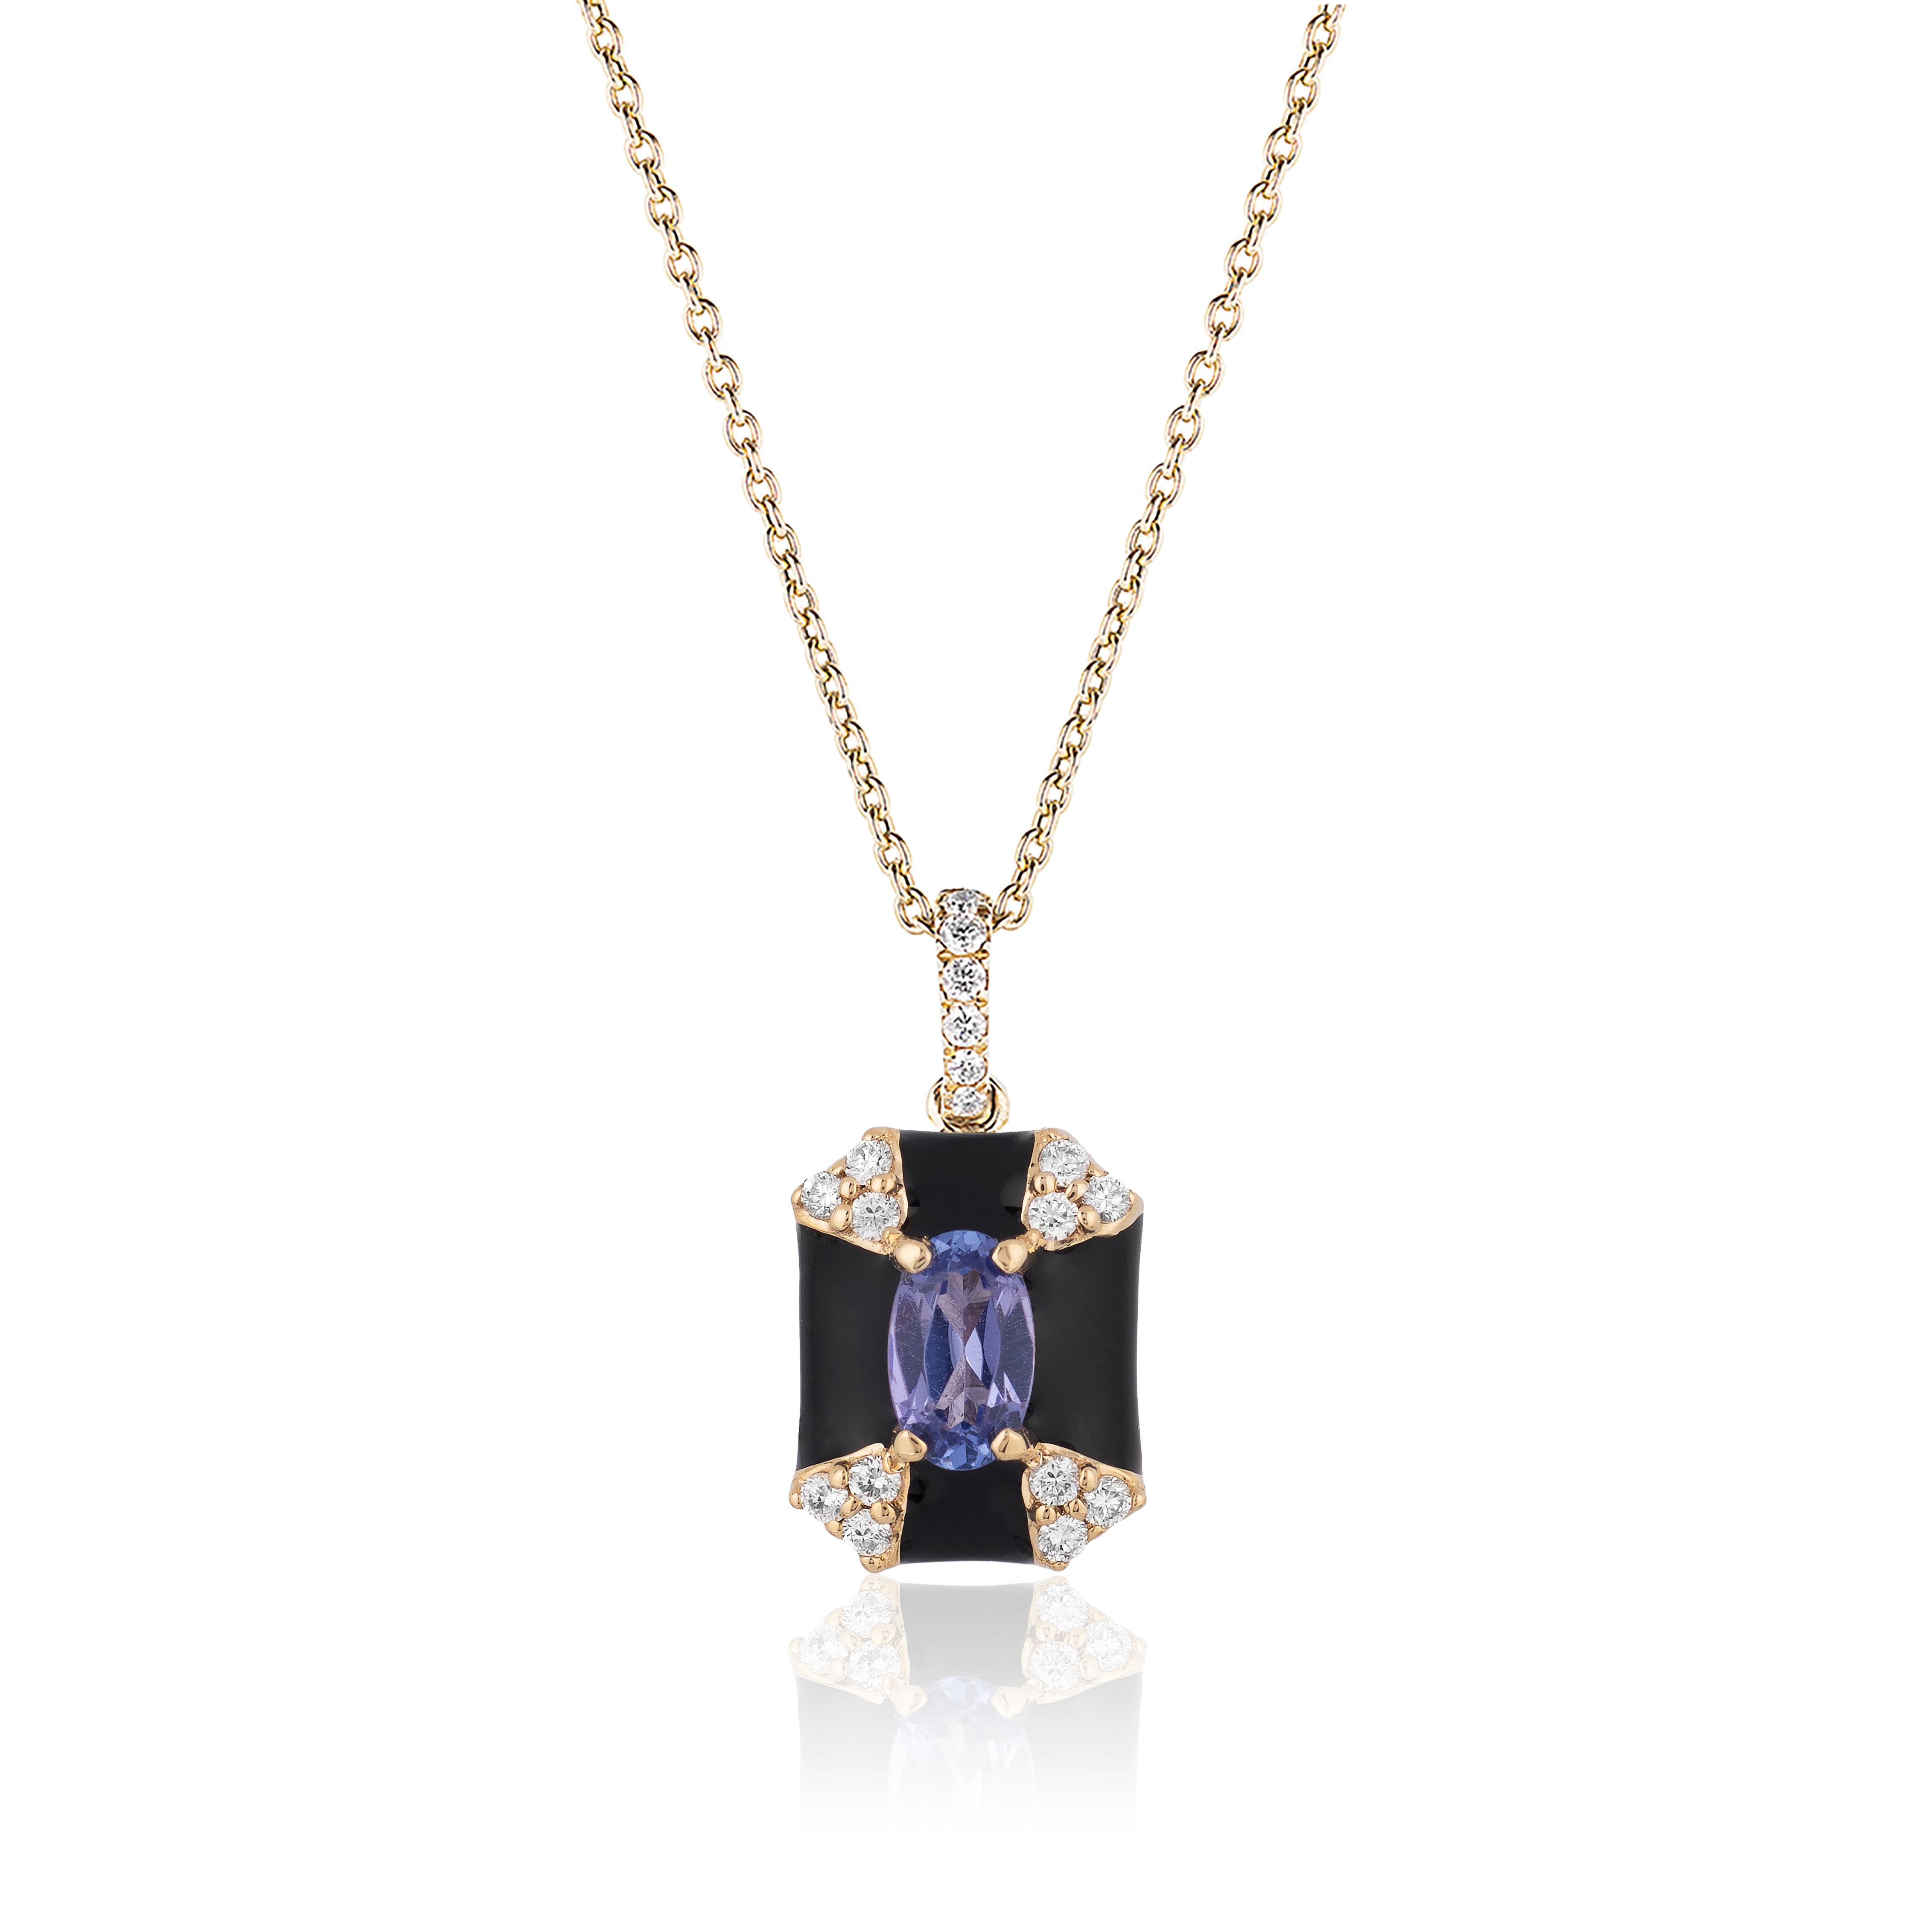 Queen' Octagon Black Enamel Pendant with Sapphire and Diamonds in 18K Yellow Gold.
Stone Size: 4 mm 
Gemstone Approx. Stone Wt: Sapphire- 0.32 Carats 
Diamonds: G-H / VS, Approx. Wt: 0.10 Carats